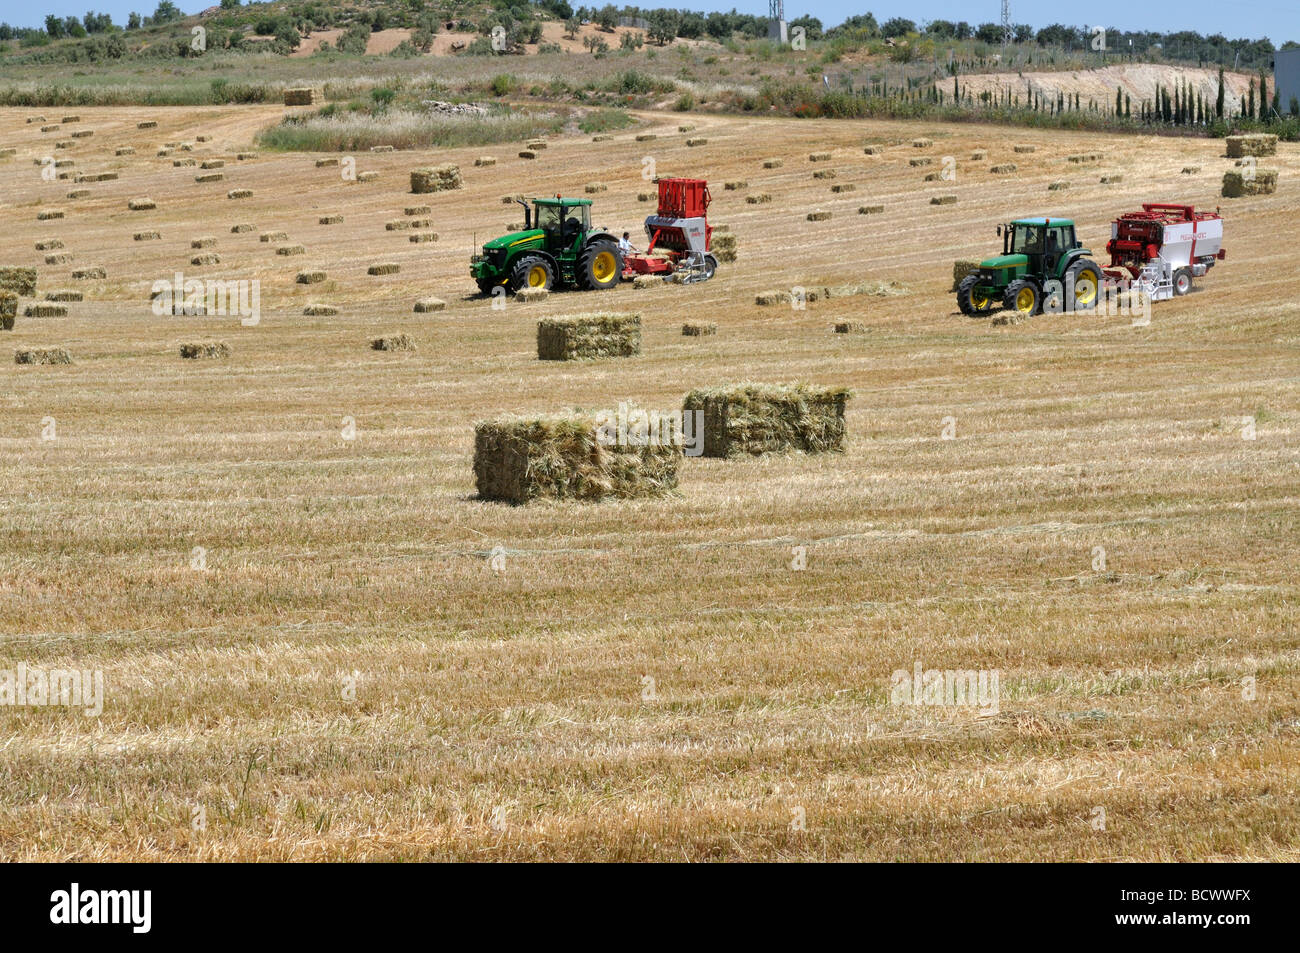 Tractors in field of straw baling small straw bales into larger ones at harvest time Stock Photo